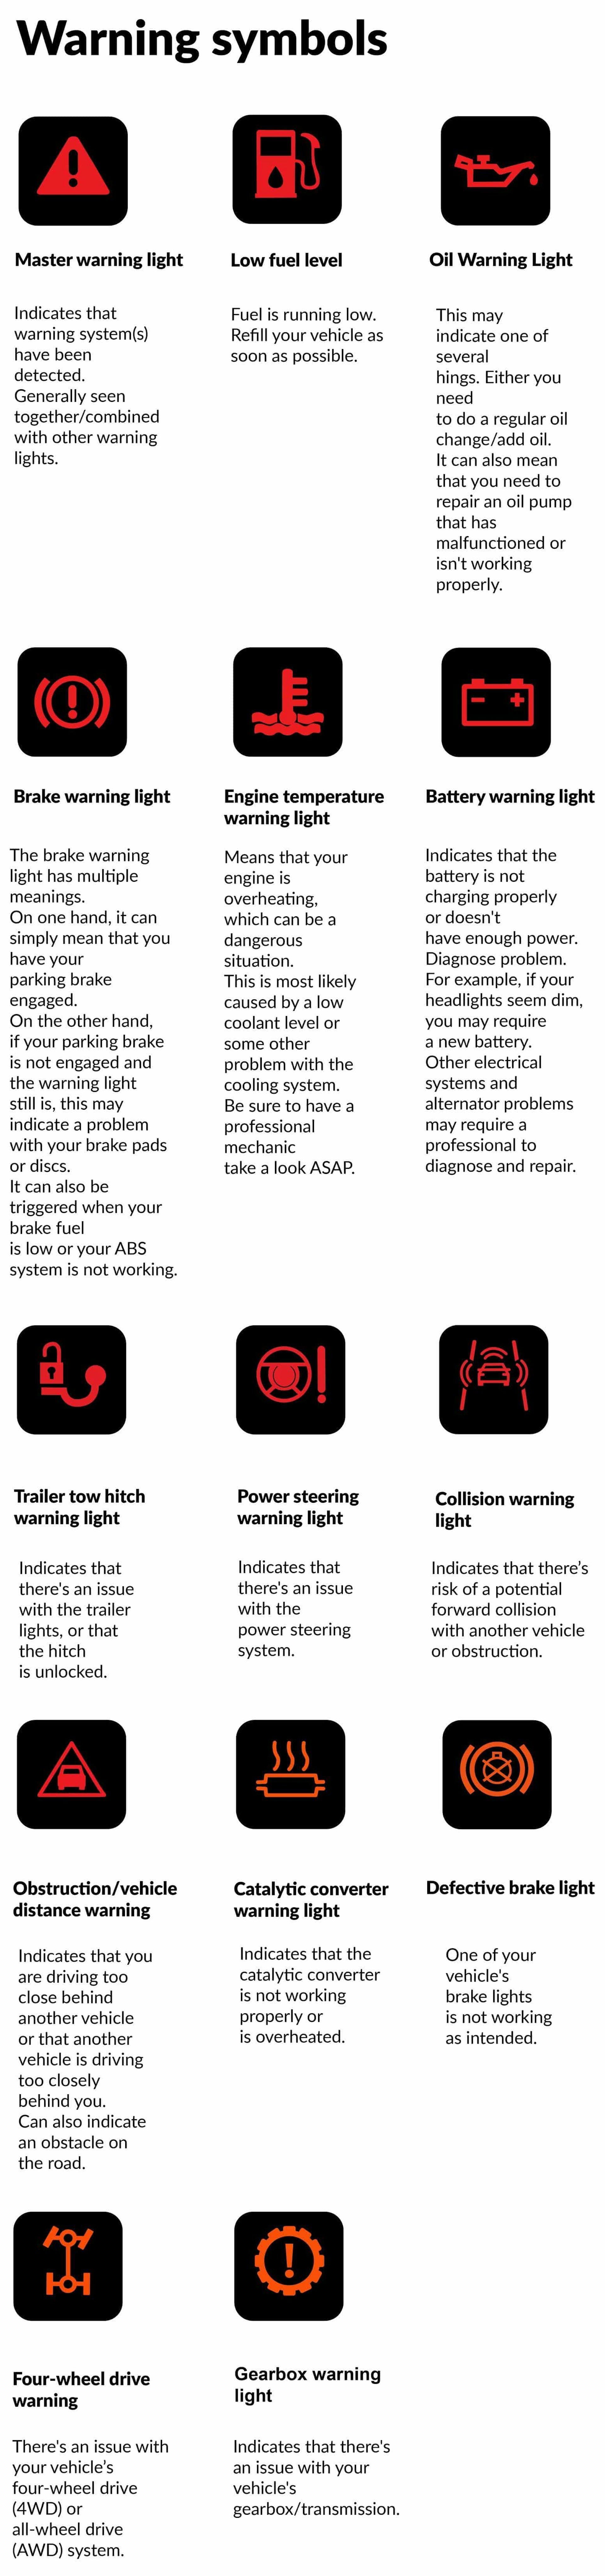 All Dashboard Lights Explained: Meaning of Symbols & Indicators